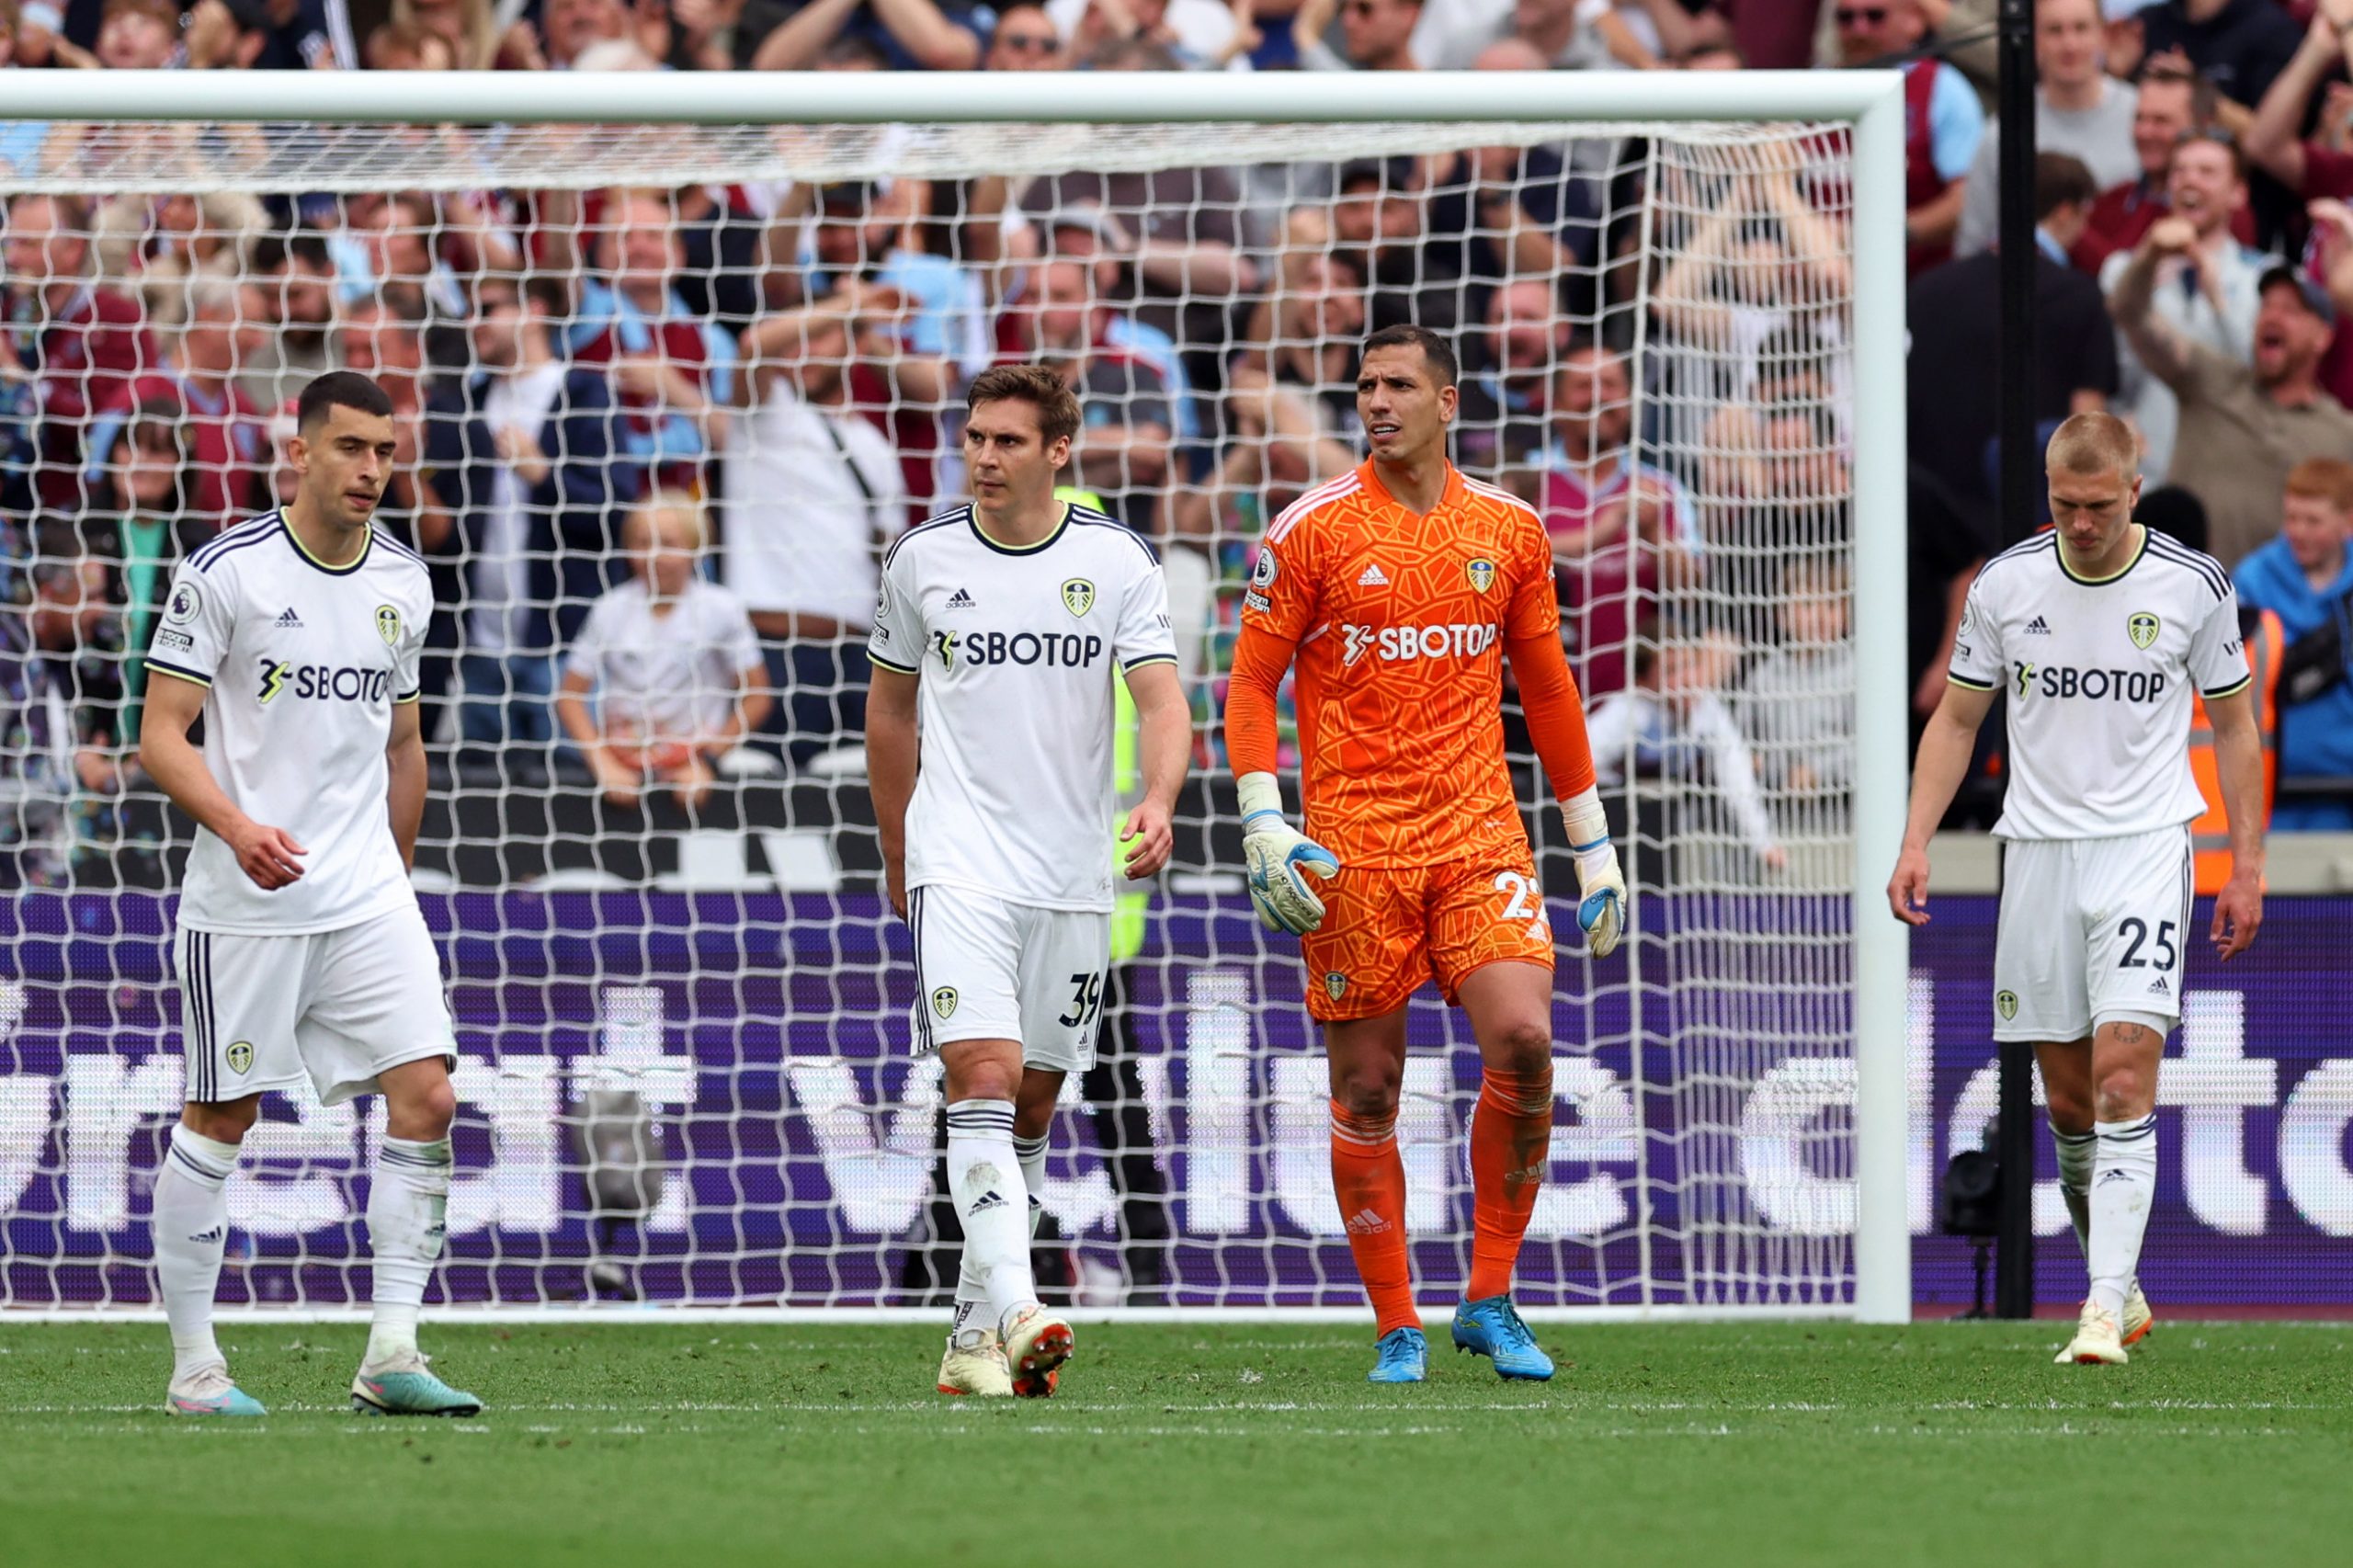 LONDON, ENGLAND - MAY 21: Marc Roca, Max Woeber, Joel Robles and Rasmus Kristensen of Leeds United look dejected after the West Ham United third goal during the Premier League match between West Ham United and Leeds United at London Stadium on May 21, 2023 in London, England. (Photo by Julian Finney/Getty Images)